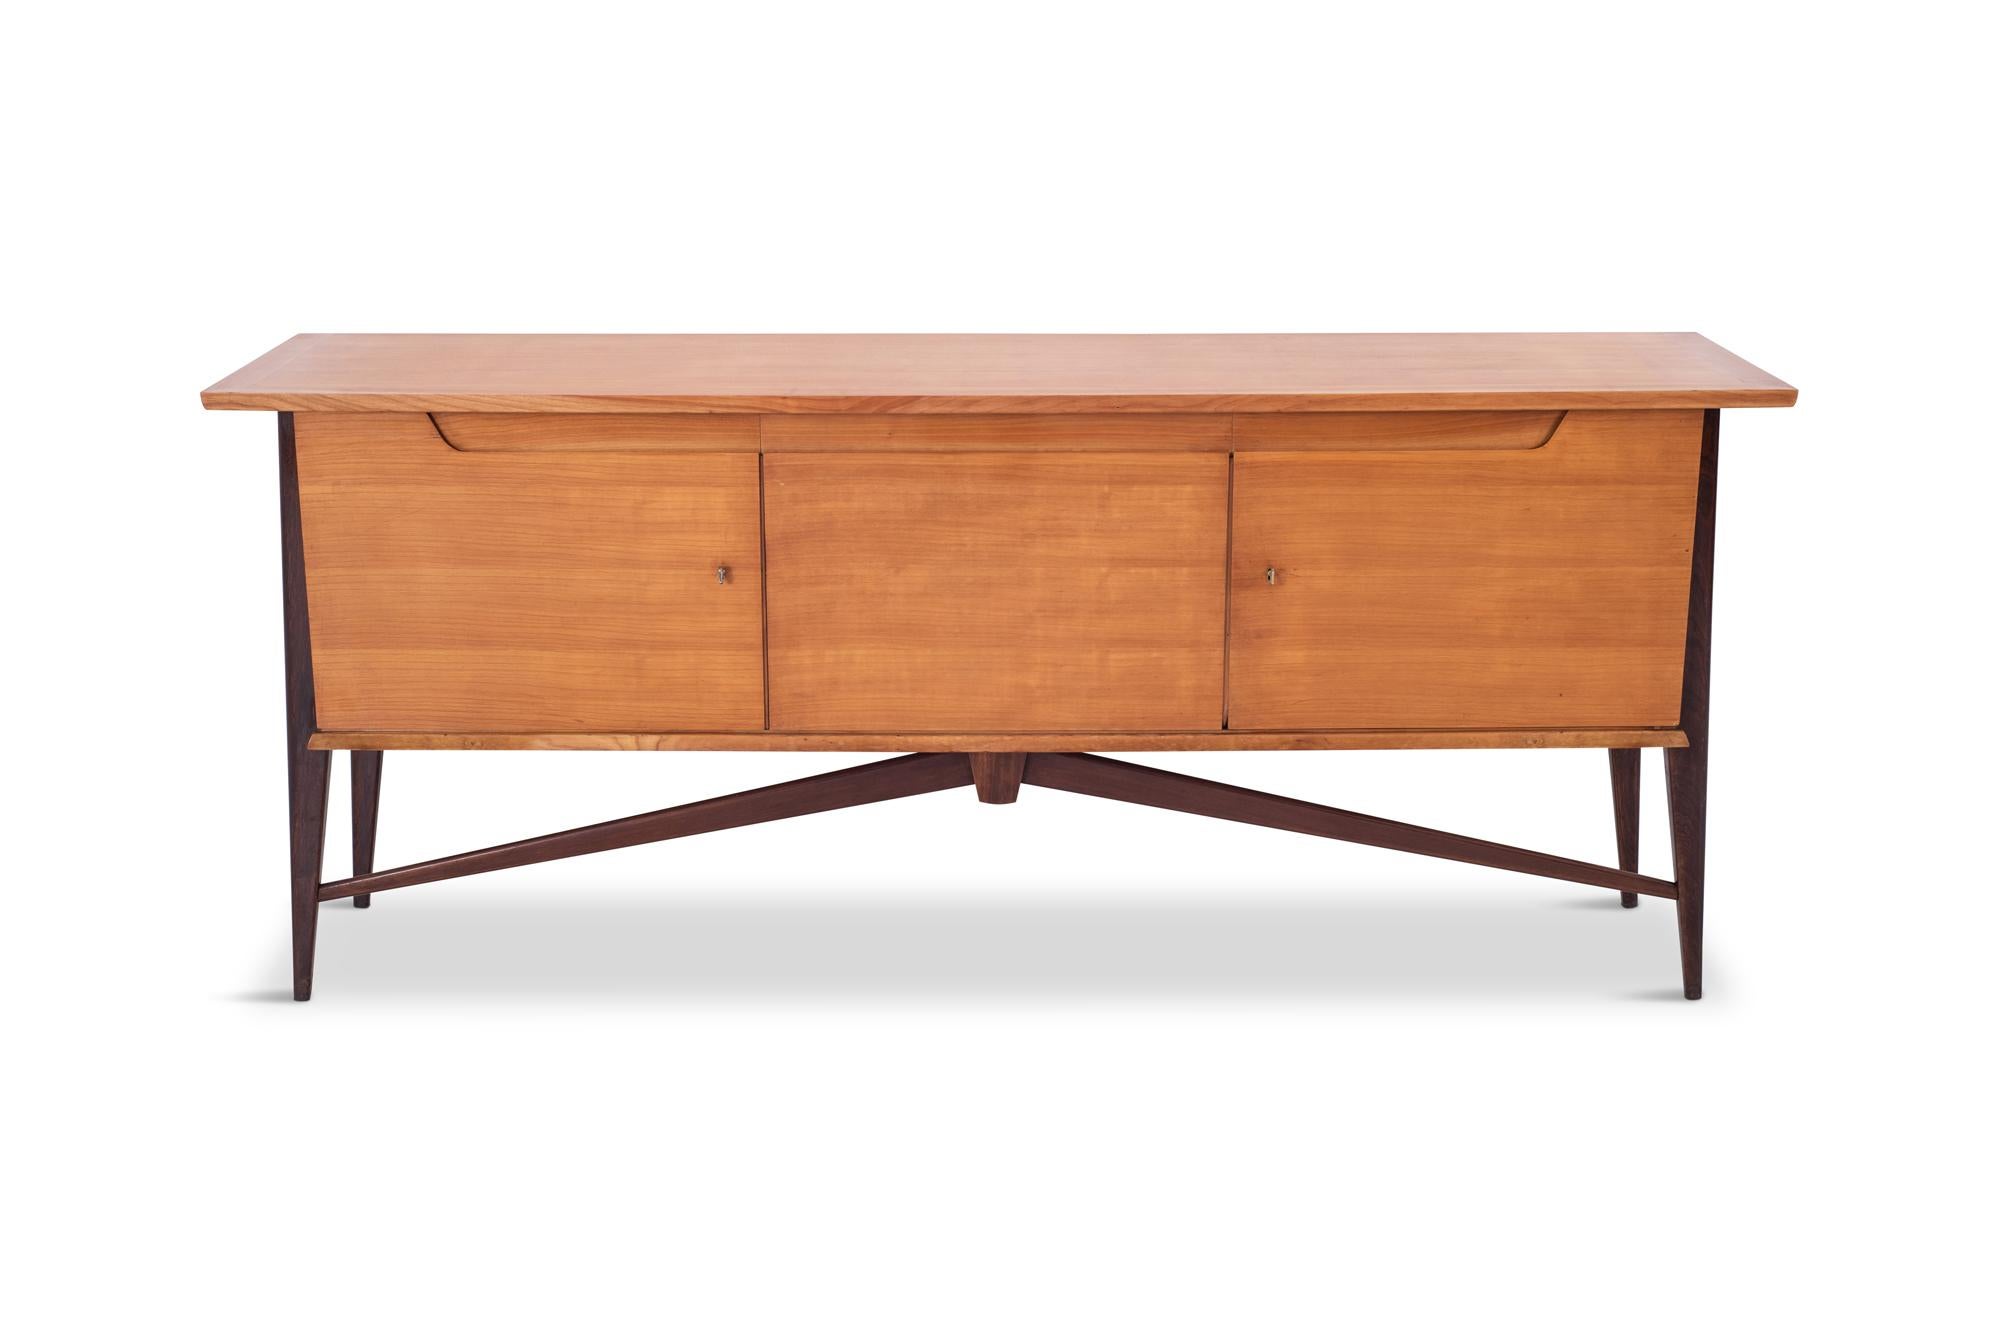 Vintage De Coene frères Credenza on free form pin legs, designed in 1958 by Van Den Bulcke.
Important mid-century modern piece for Belgian design. A two tone design in cherry wood and walnut. Would fit well in a Gio Ponti inspired interior. Gio